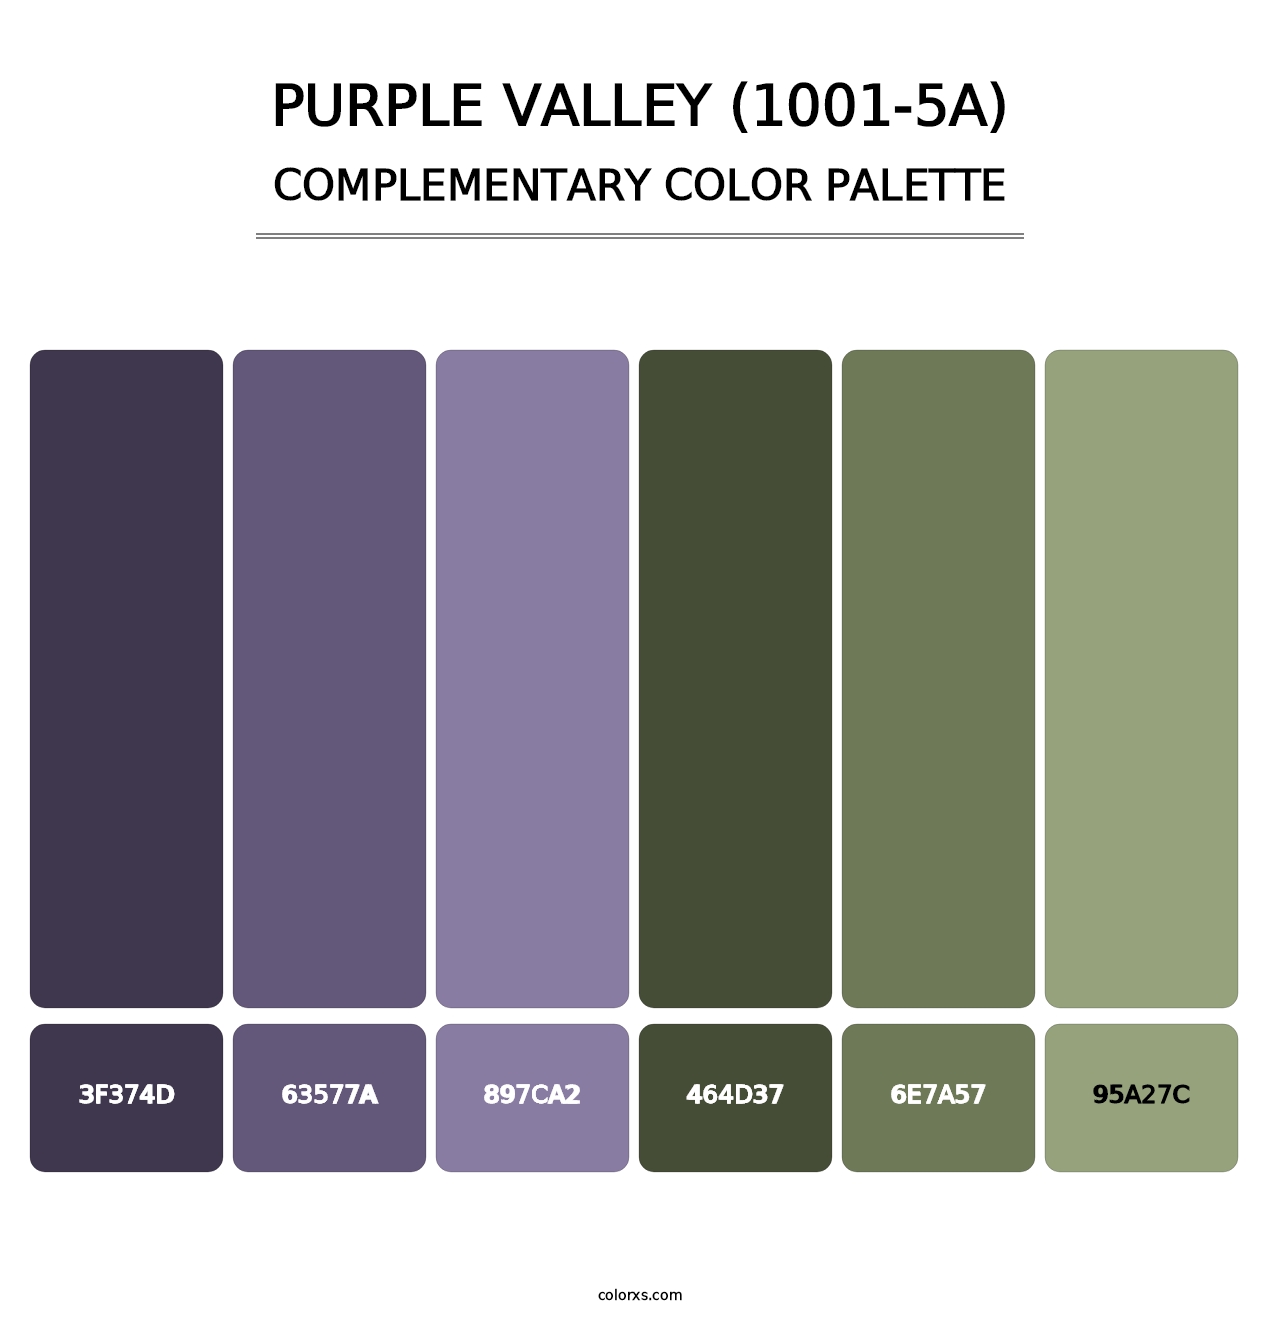 Purple Valley (1001-5A) - Complementary Color Palette